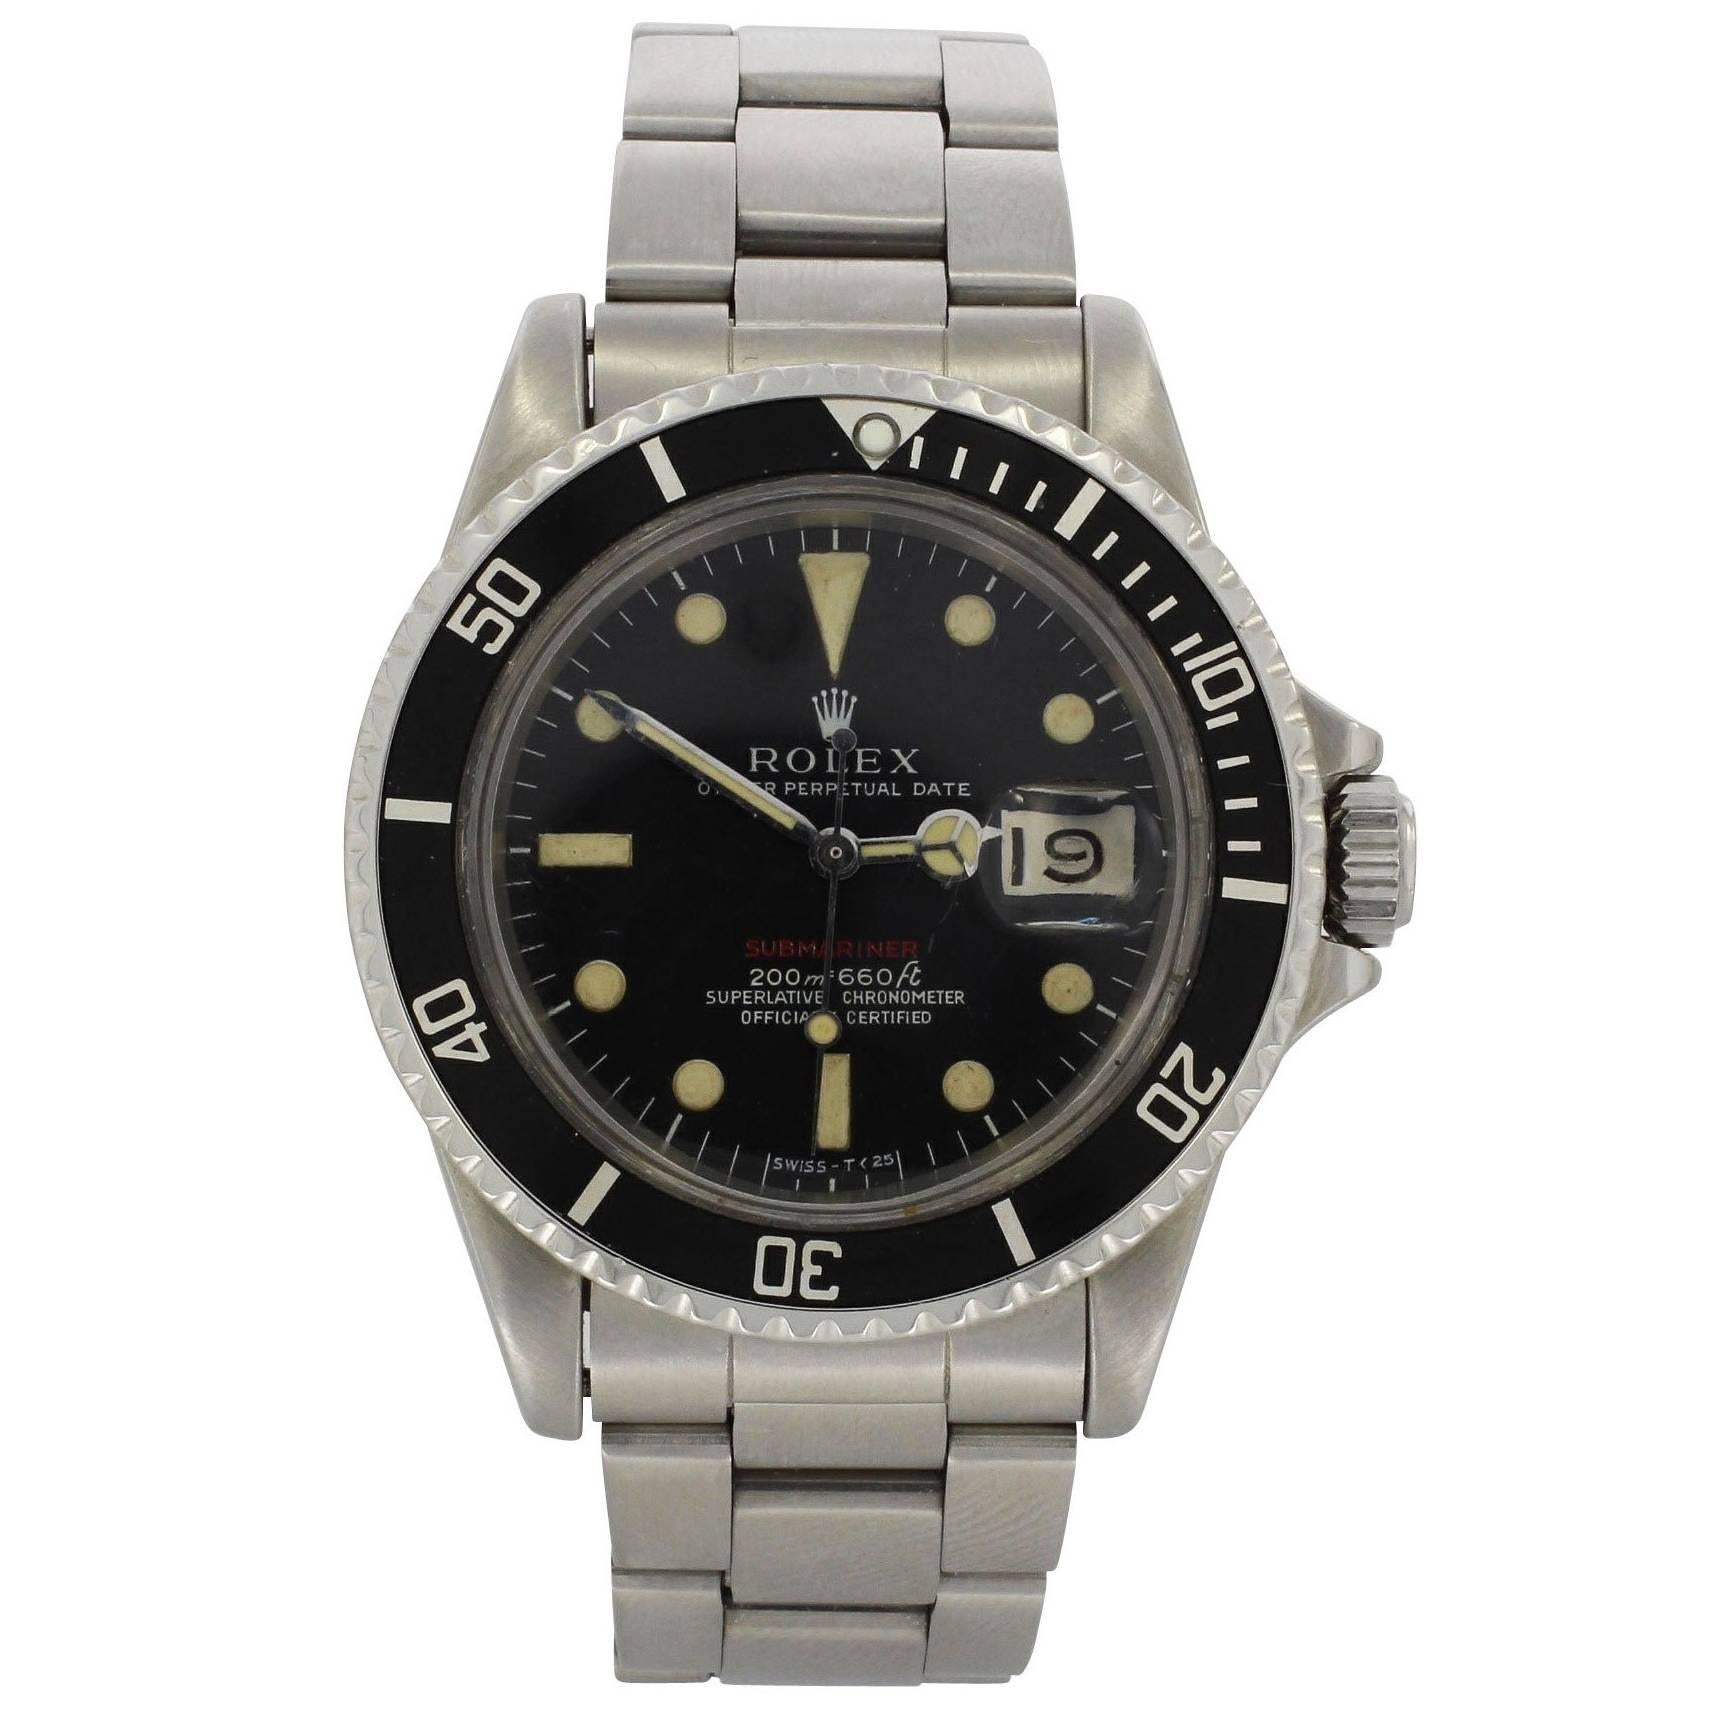 Rolex Stainless Steel Big Red 1680 Submariner Wristwatch, 1979 For Sale